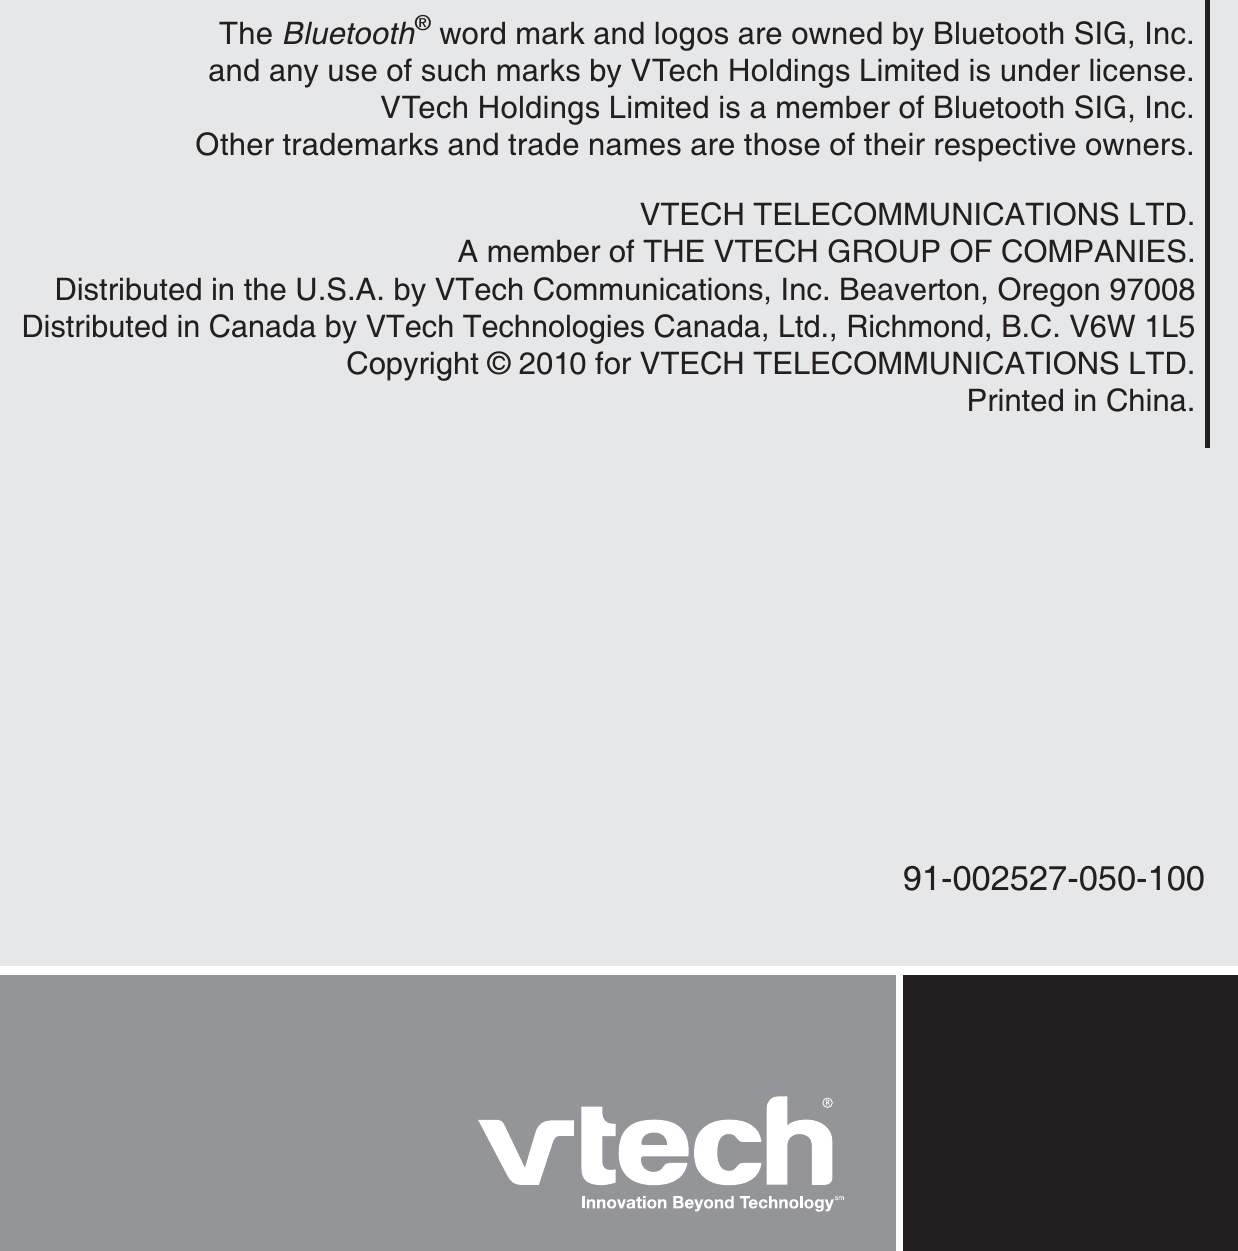 VTECH TELECOMMUNICATIONS LTD.A member of THE VTECH GROUP OF COMPANIES.Distributed in the U.S.A. by VTech Communications, Inc. Beaverton, Oregon 97008Distributed in Canada by VTech Technologies Canada, Ltd., Richmond, B.C. V6W 1L5Copyright © 2010 for VTECH TELECOMMUNICATIONS LTD.Printed in China.91-002527-050-100The Bluetooth® word mark and logos are owned by Bluetooth SIG, Inc. and any use of such marks by VTech Holdings Limited is under license. VTech Holdings Limited is a member of Bluetooth SIG, Inc. Other trademarks and trade names are those of their respective owners.